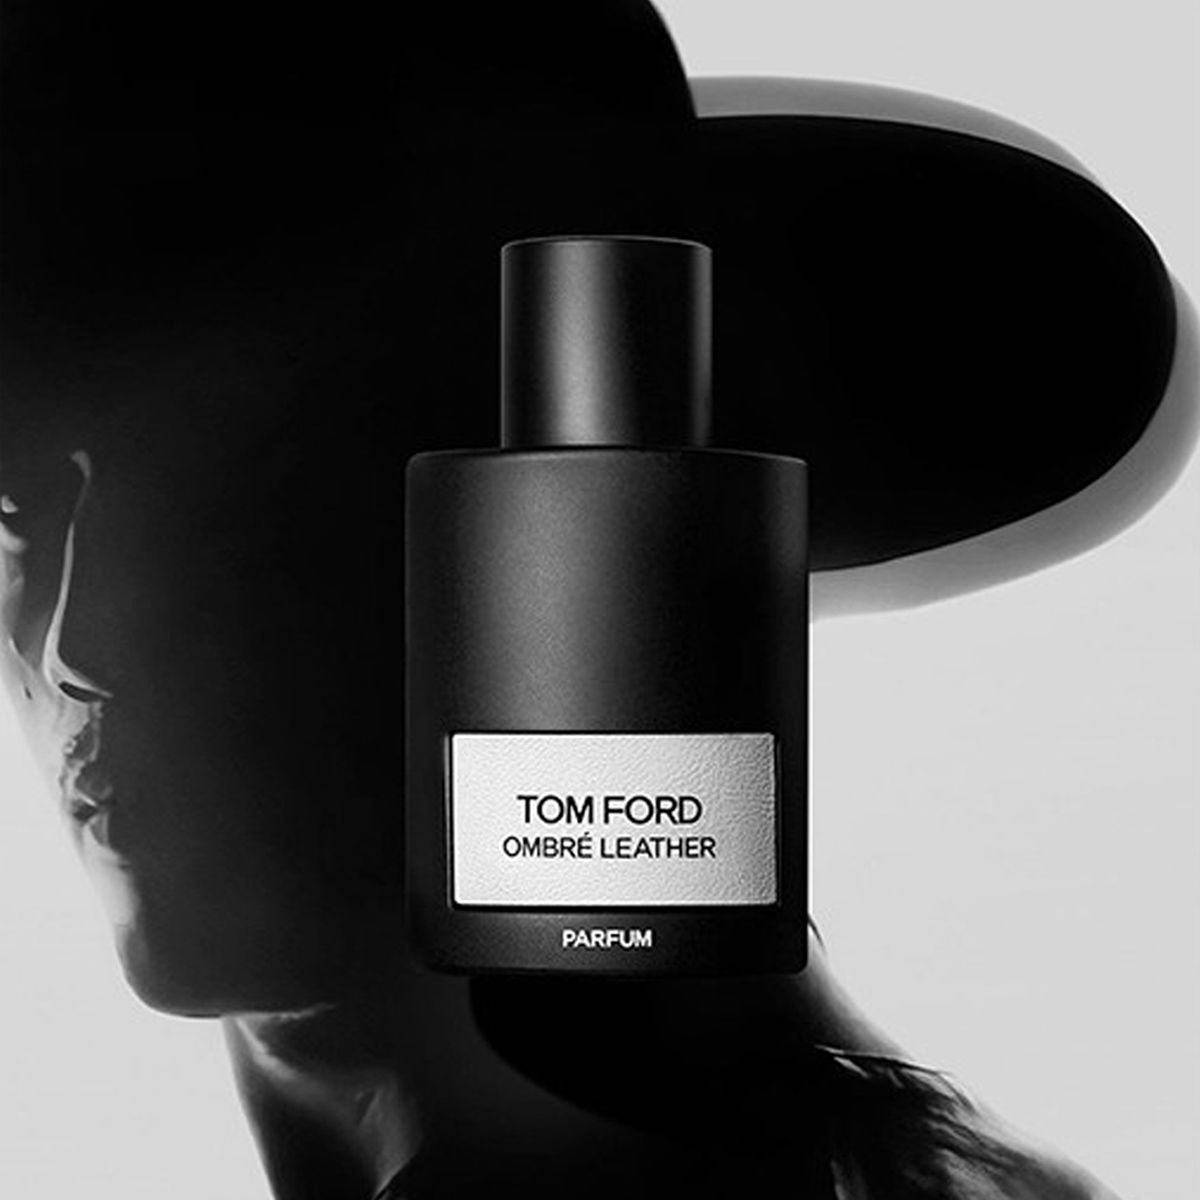 Top 87+ imagen tom ford ombre leather cologne - Abzlocal.mx